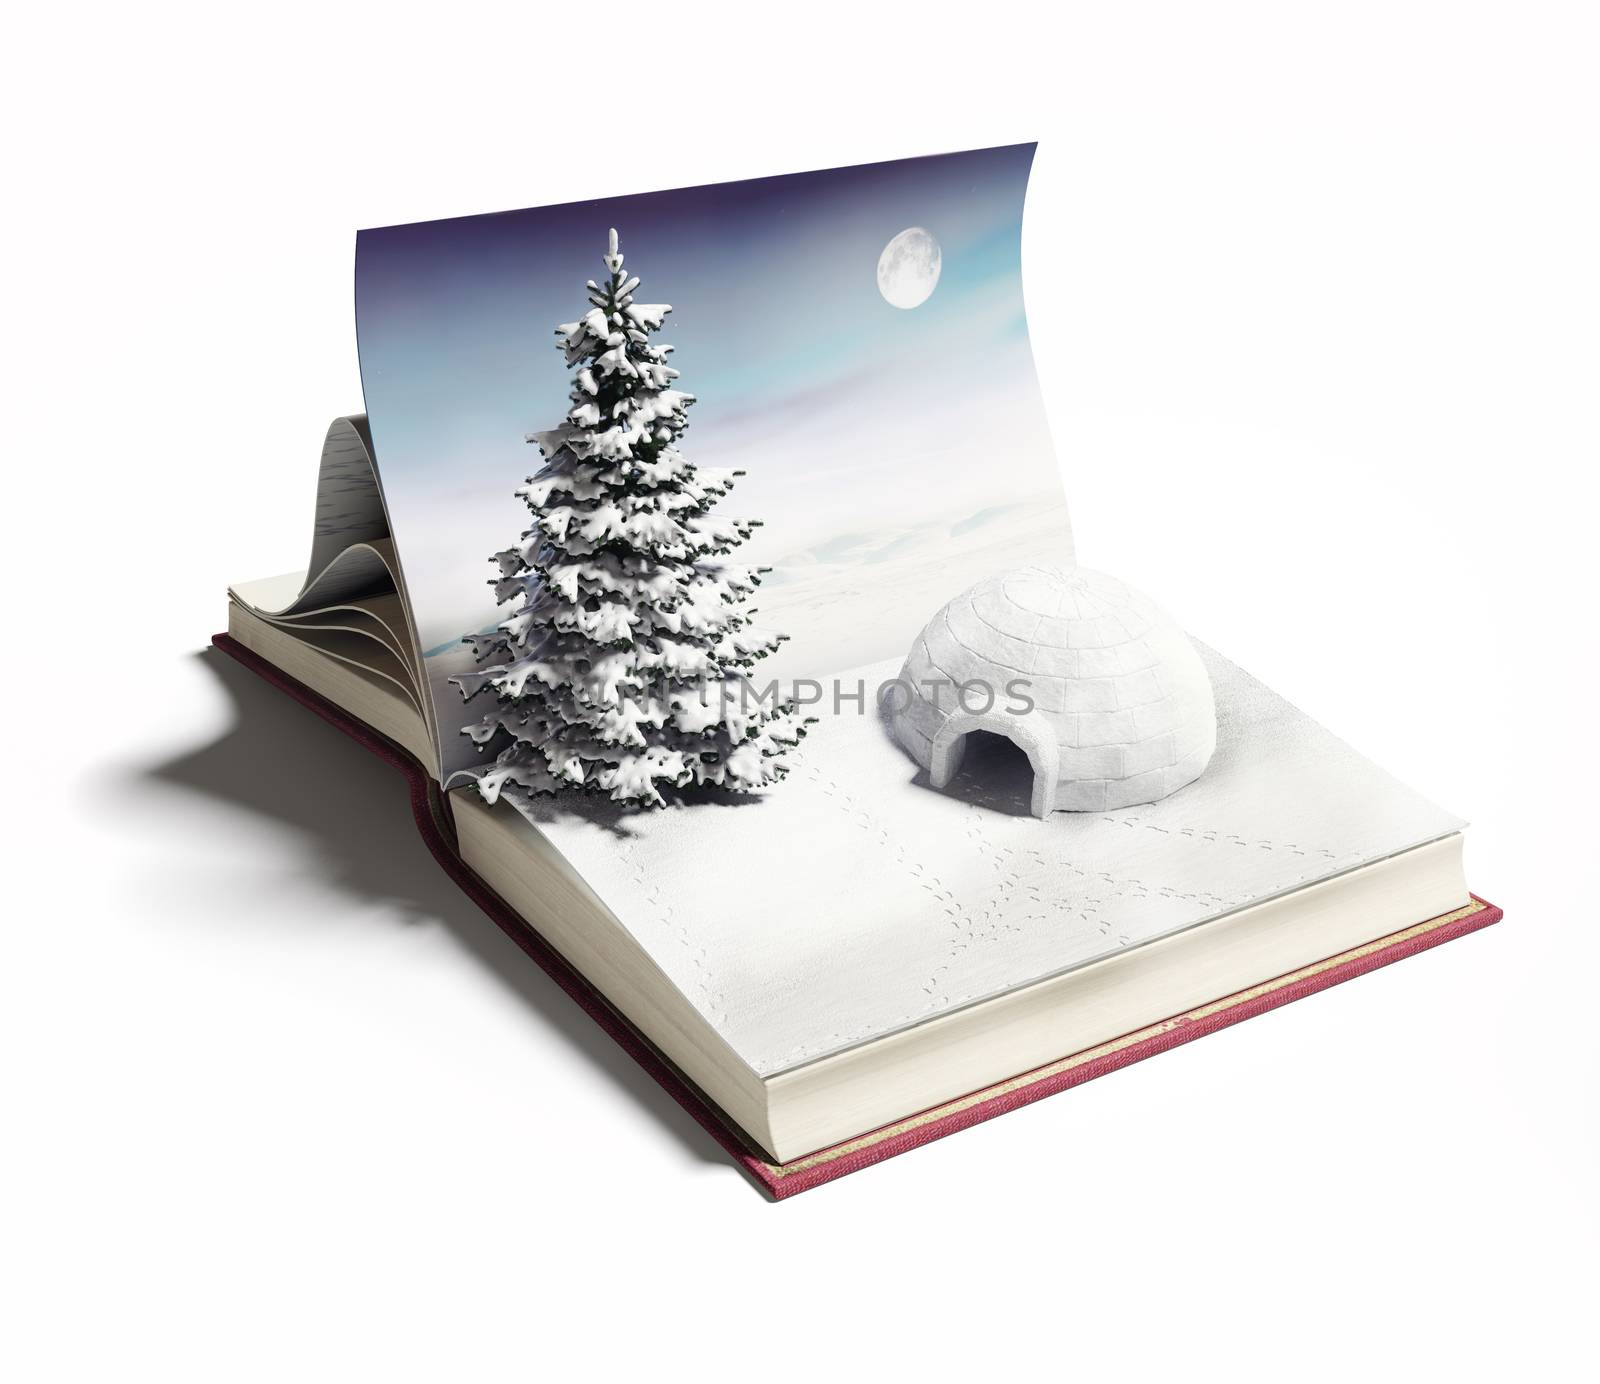 igloo on the open book. 3d concept